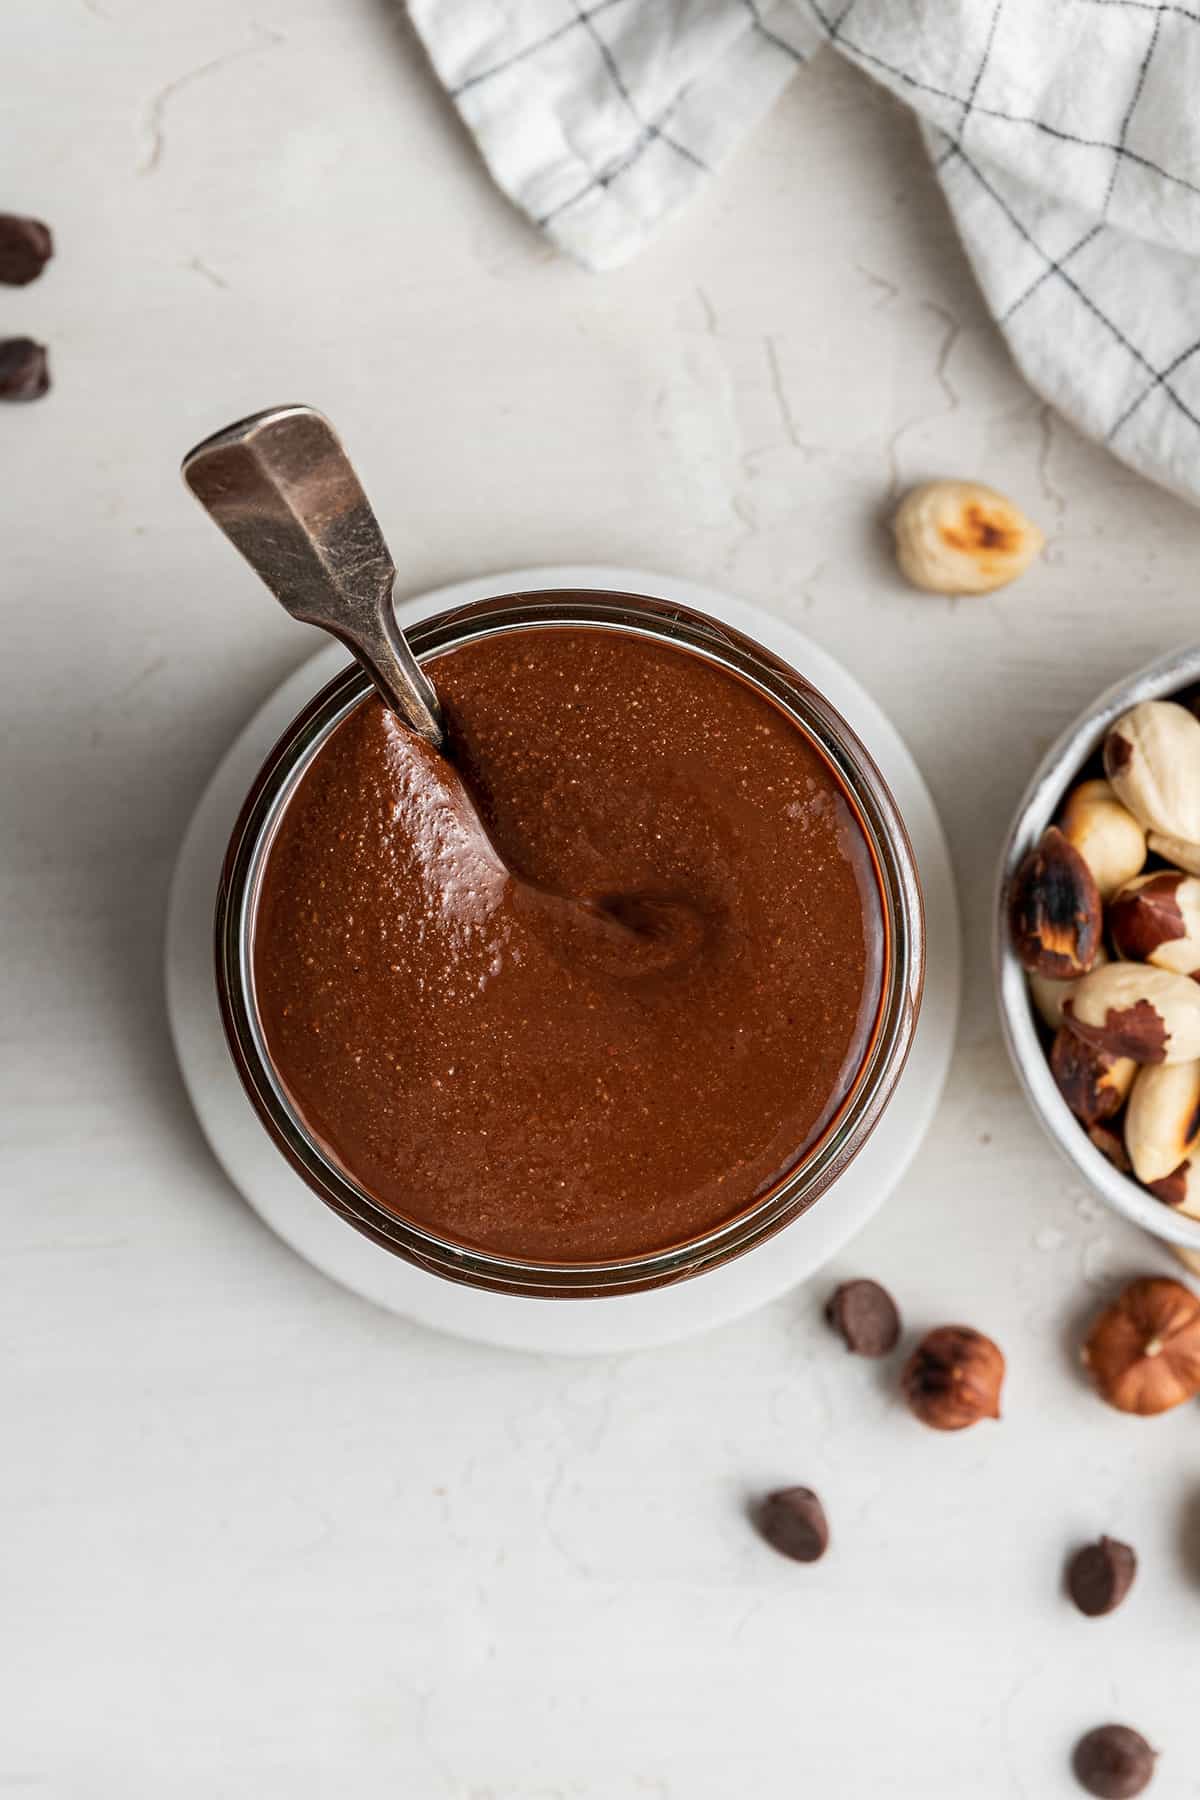 Overhead view of a jar of nutella with a spoon in it, next to some hazelnuts